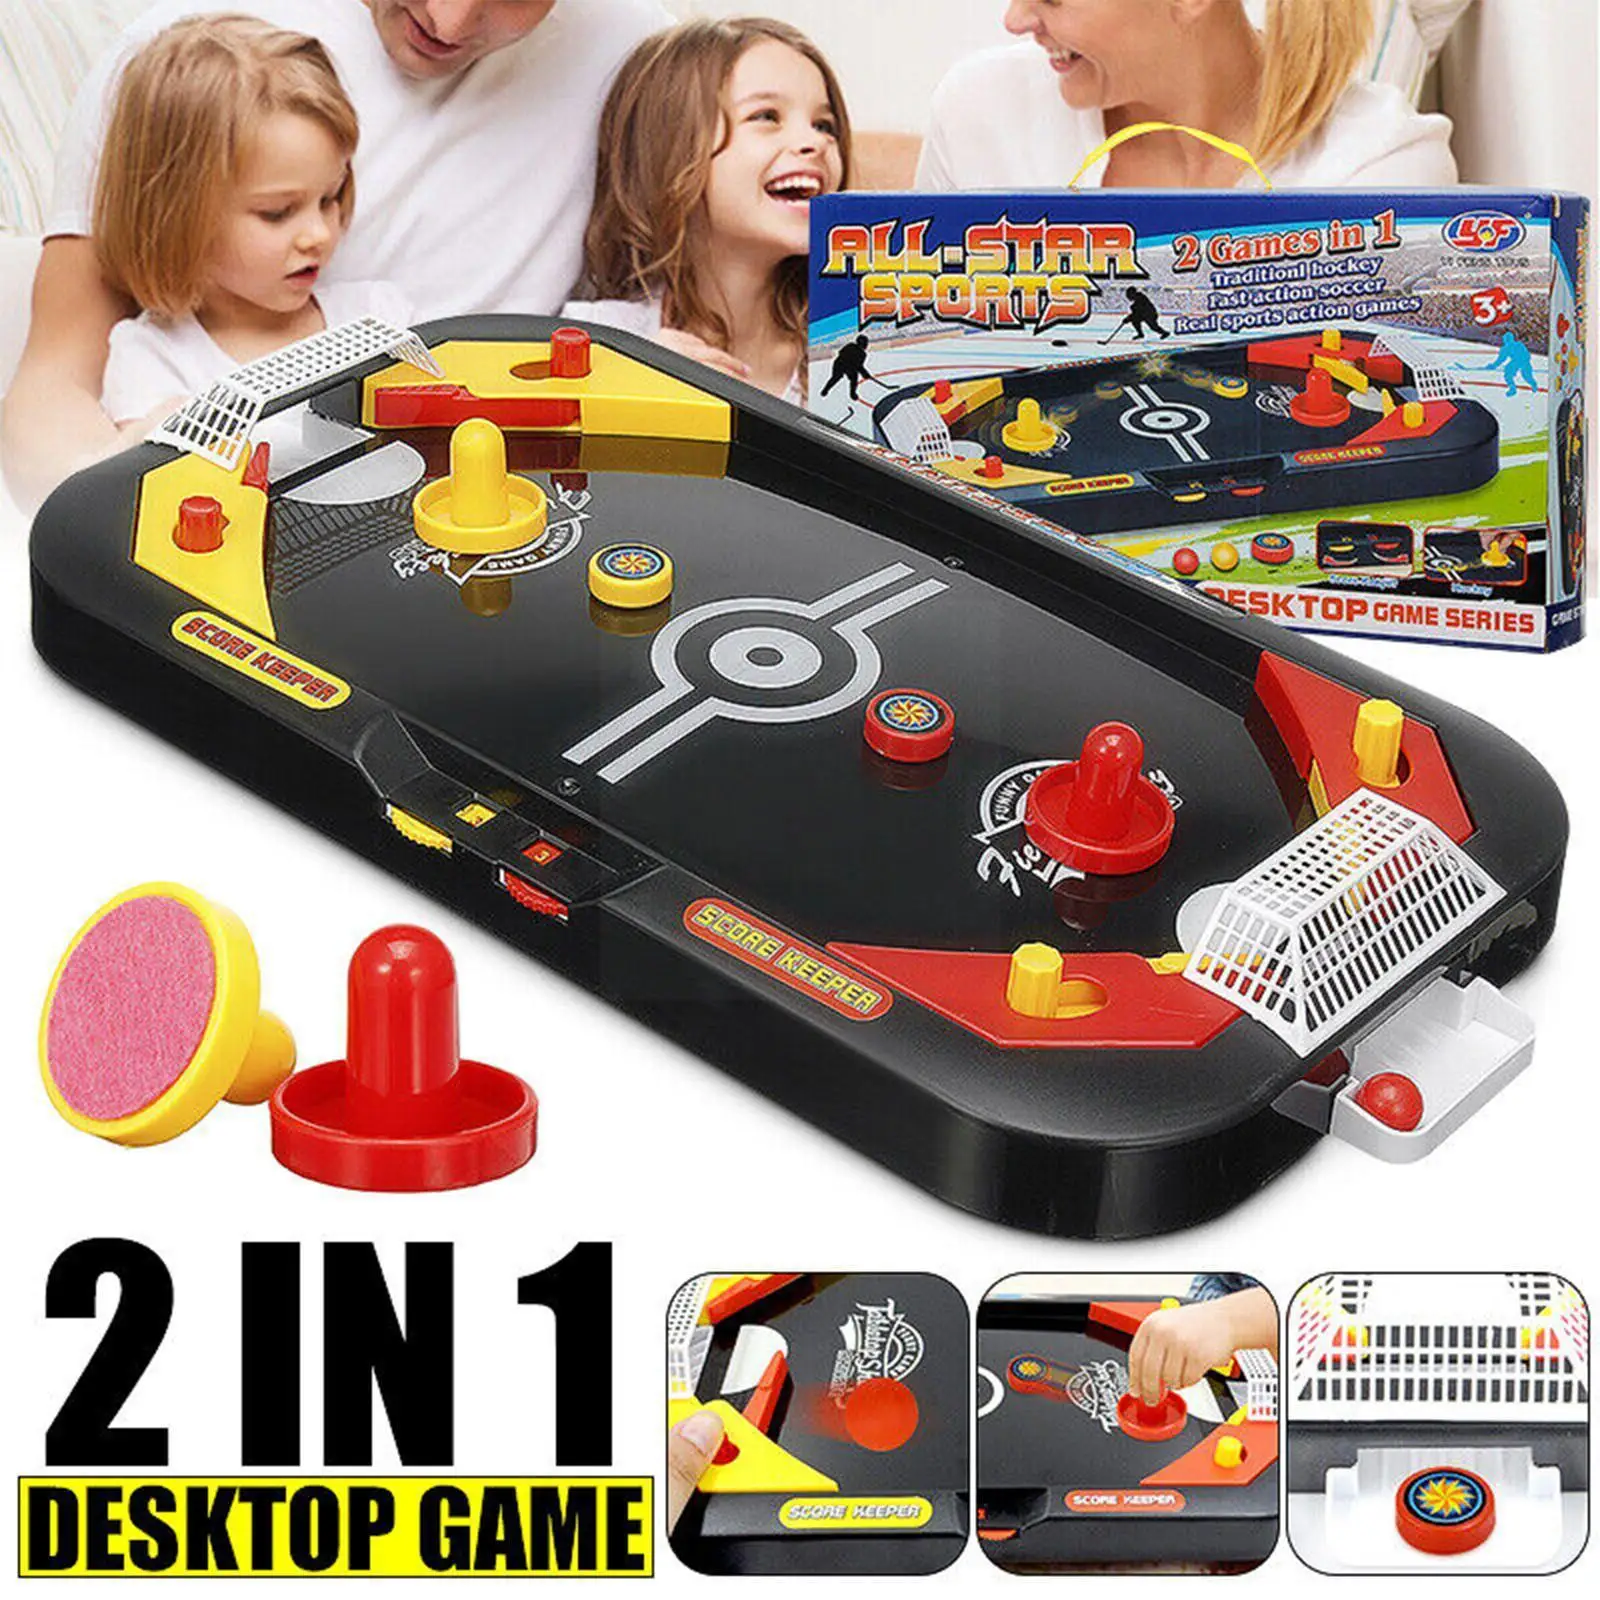 

Kids Table Hockey Game 2 In 1 Soccer & Ice Mini Desktop Interactive Toy Anti-stress Party Board Games Toys For Children Adu R6p8